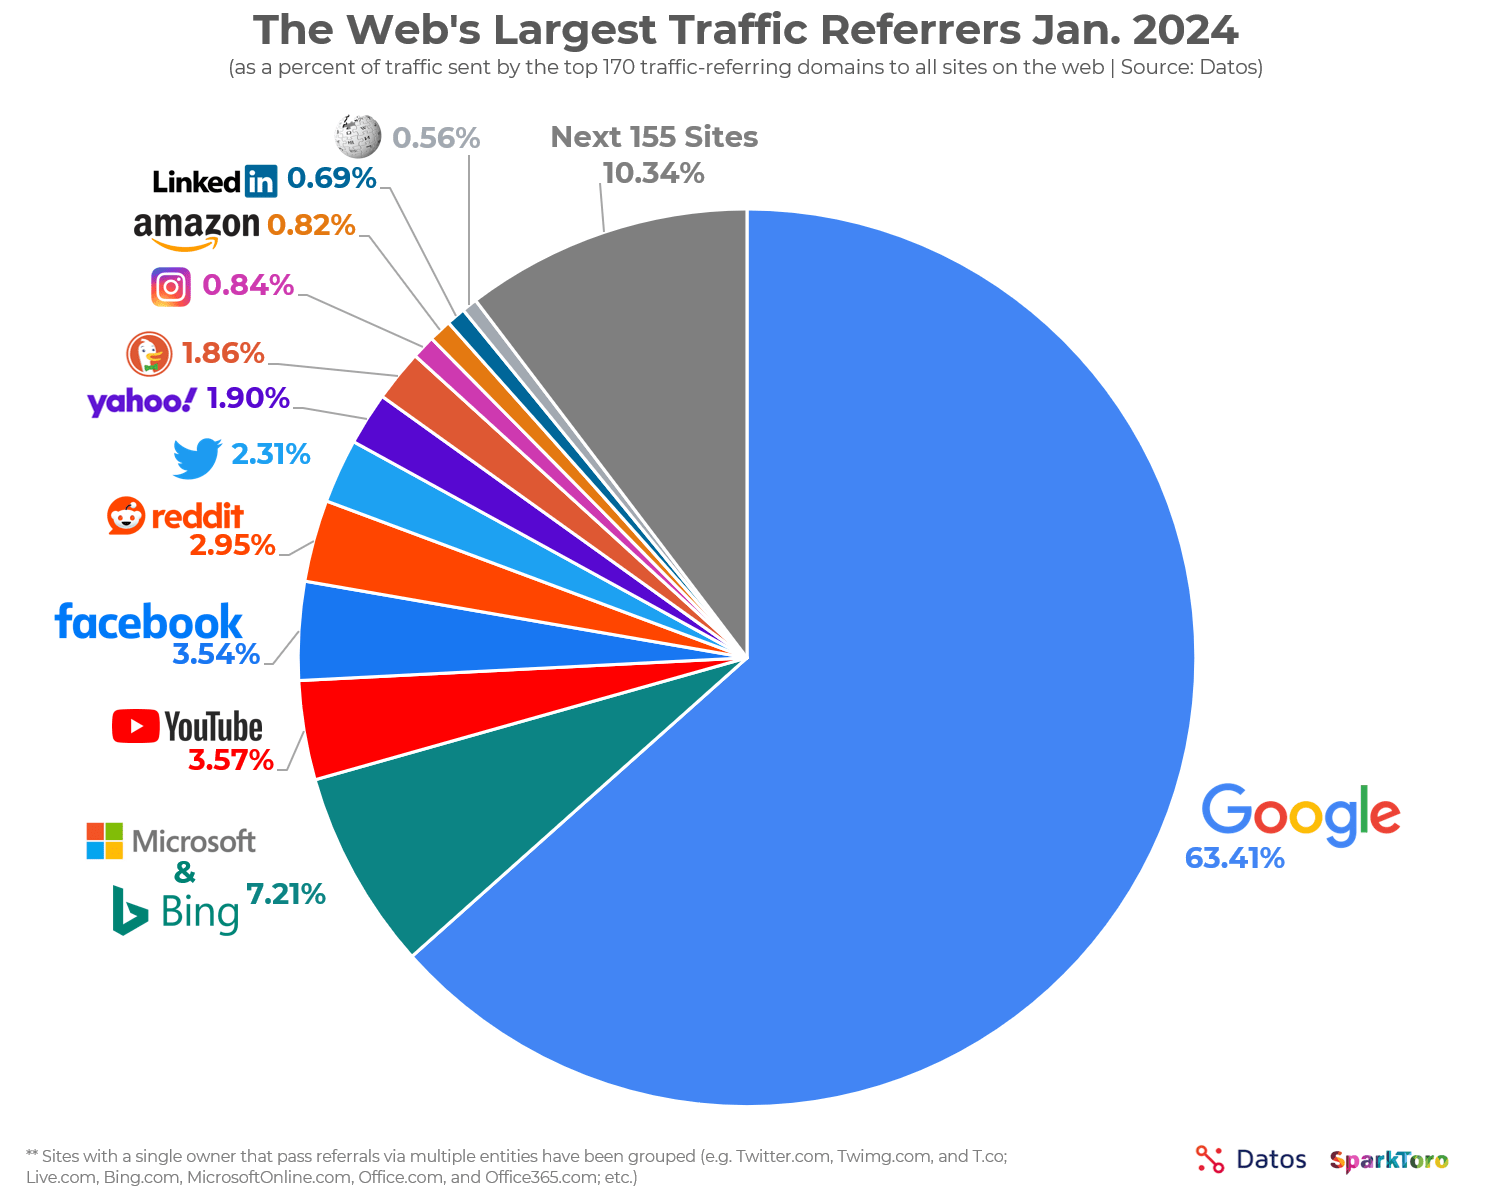 The web's largest traffic referrers